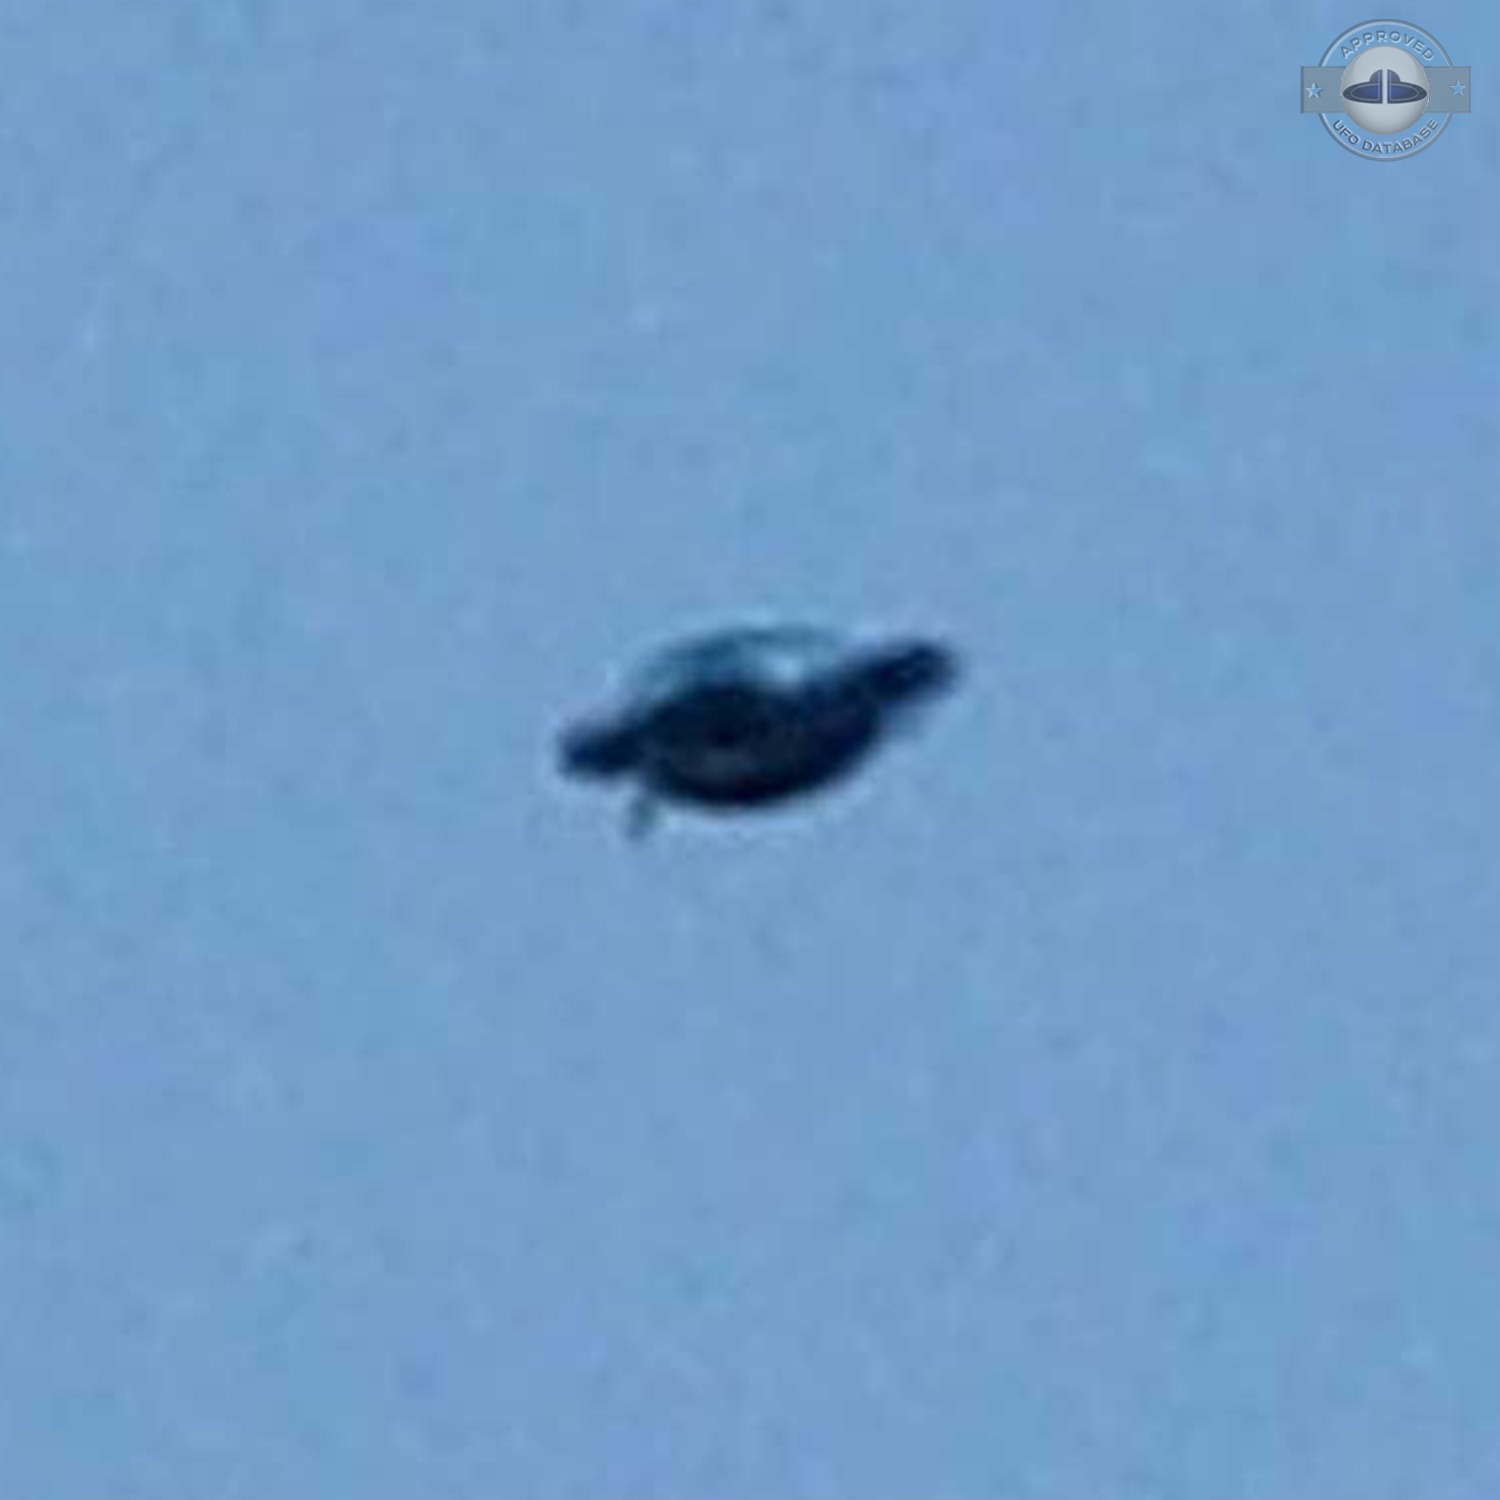 Father and Son in Zagreb, Croatia sees UFO and get picture - 2006 UFO Picture #441-2